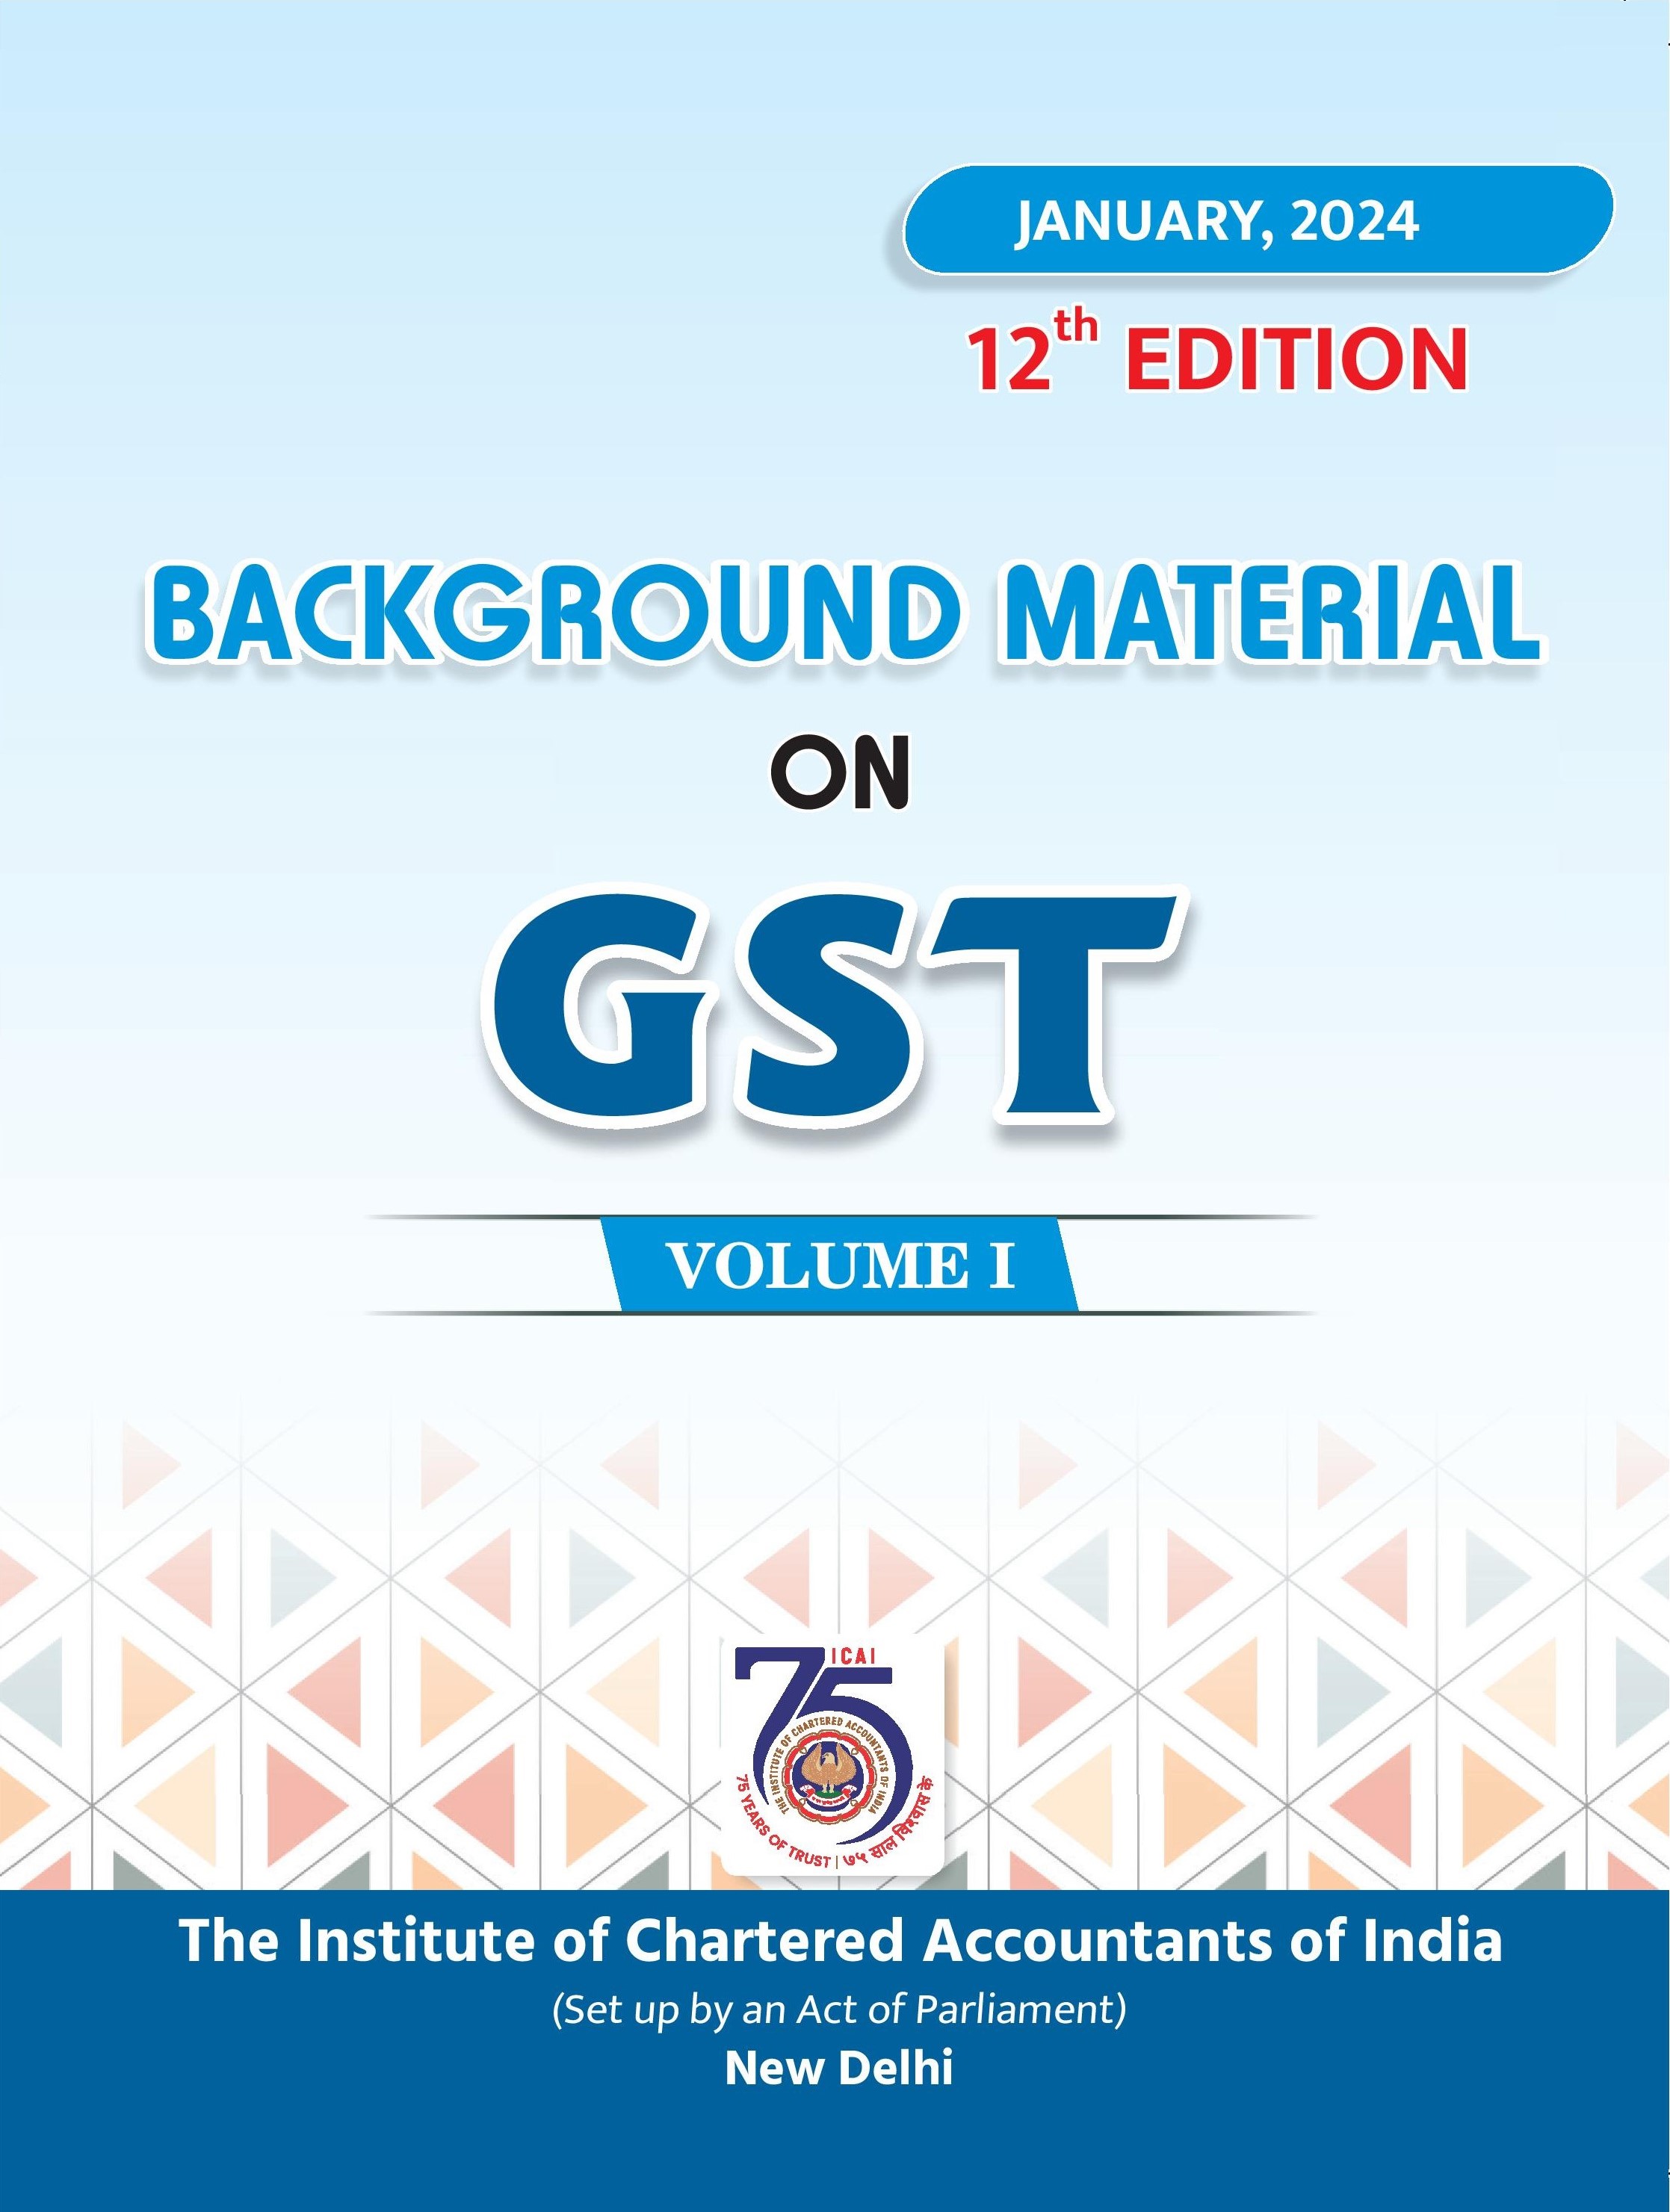 Background Material on GST - Volume - I & II - 12th Edition - (January, 2024)